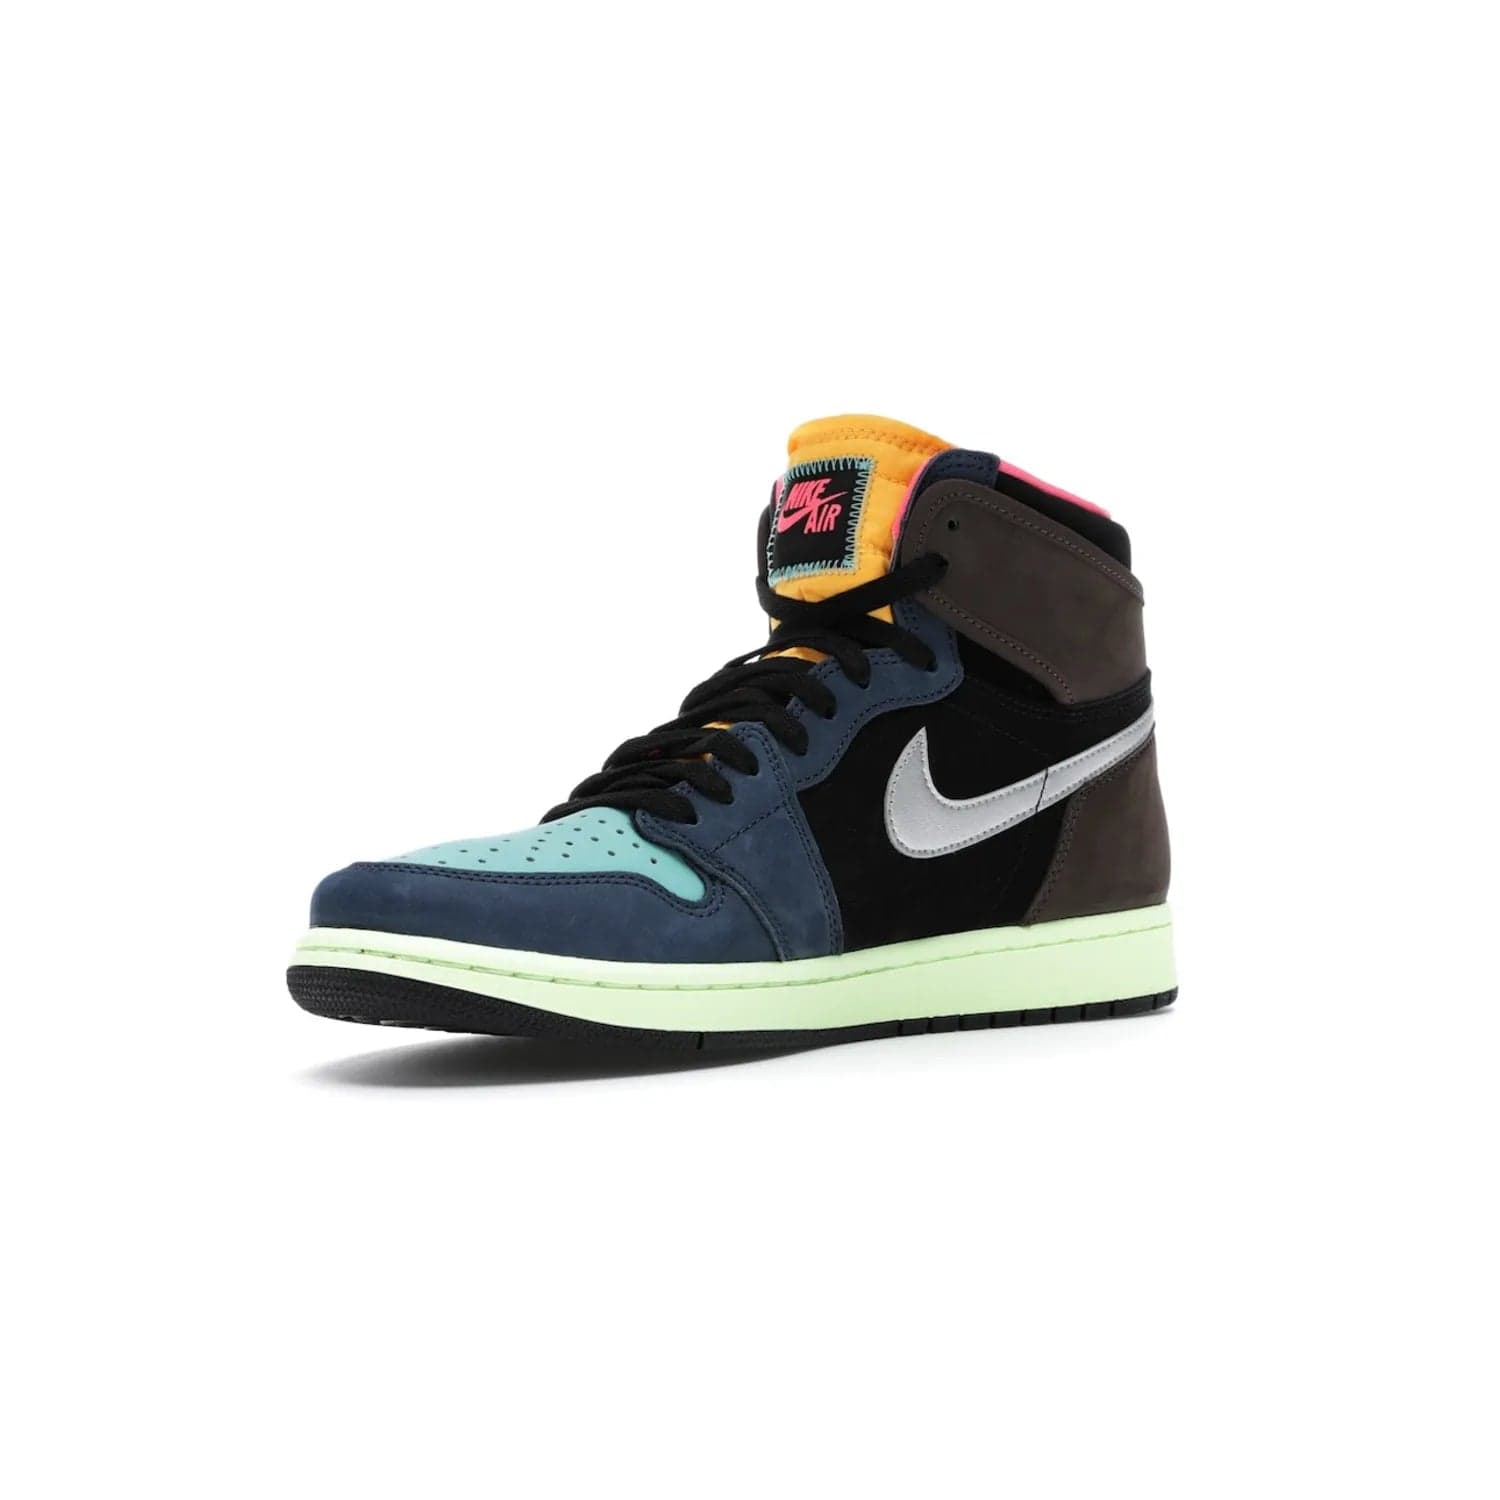 Jordan 1 Retro High Tokyo Bio Hack - Image 15 - Only at www.BallersClubKickz.com - Step up your sneaker game with the Air Jordan 1 Retro High Tokyo Bio Hack! Unique design featuring multiple materials and eye-catching colors. Metallic leather Swoosh and light green midsole for a stunning look. Available now for just $170.